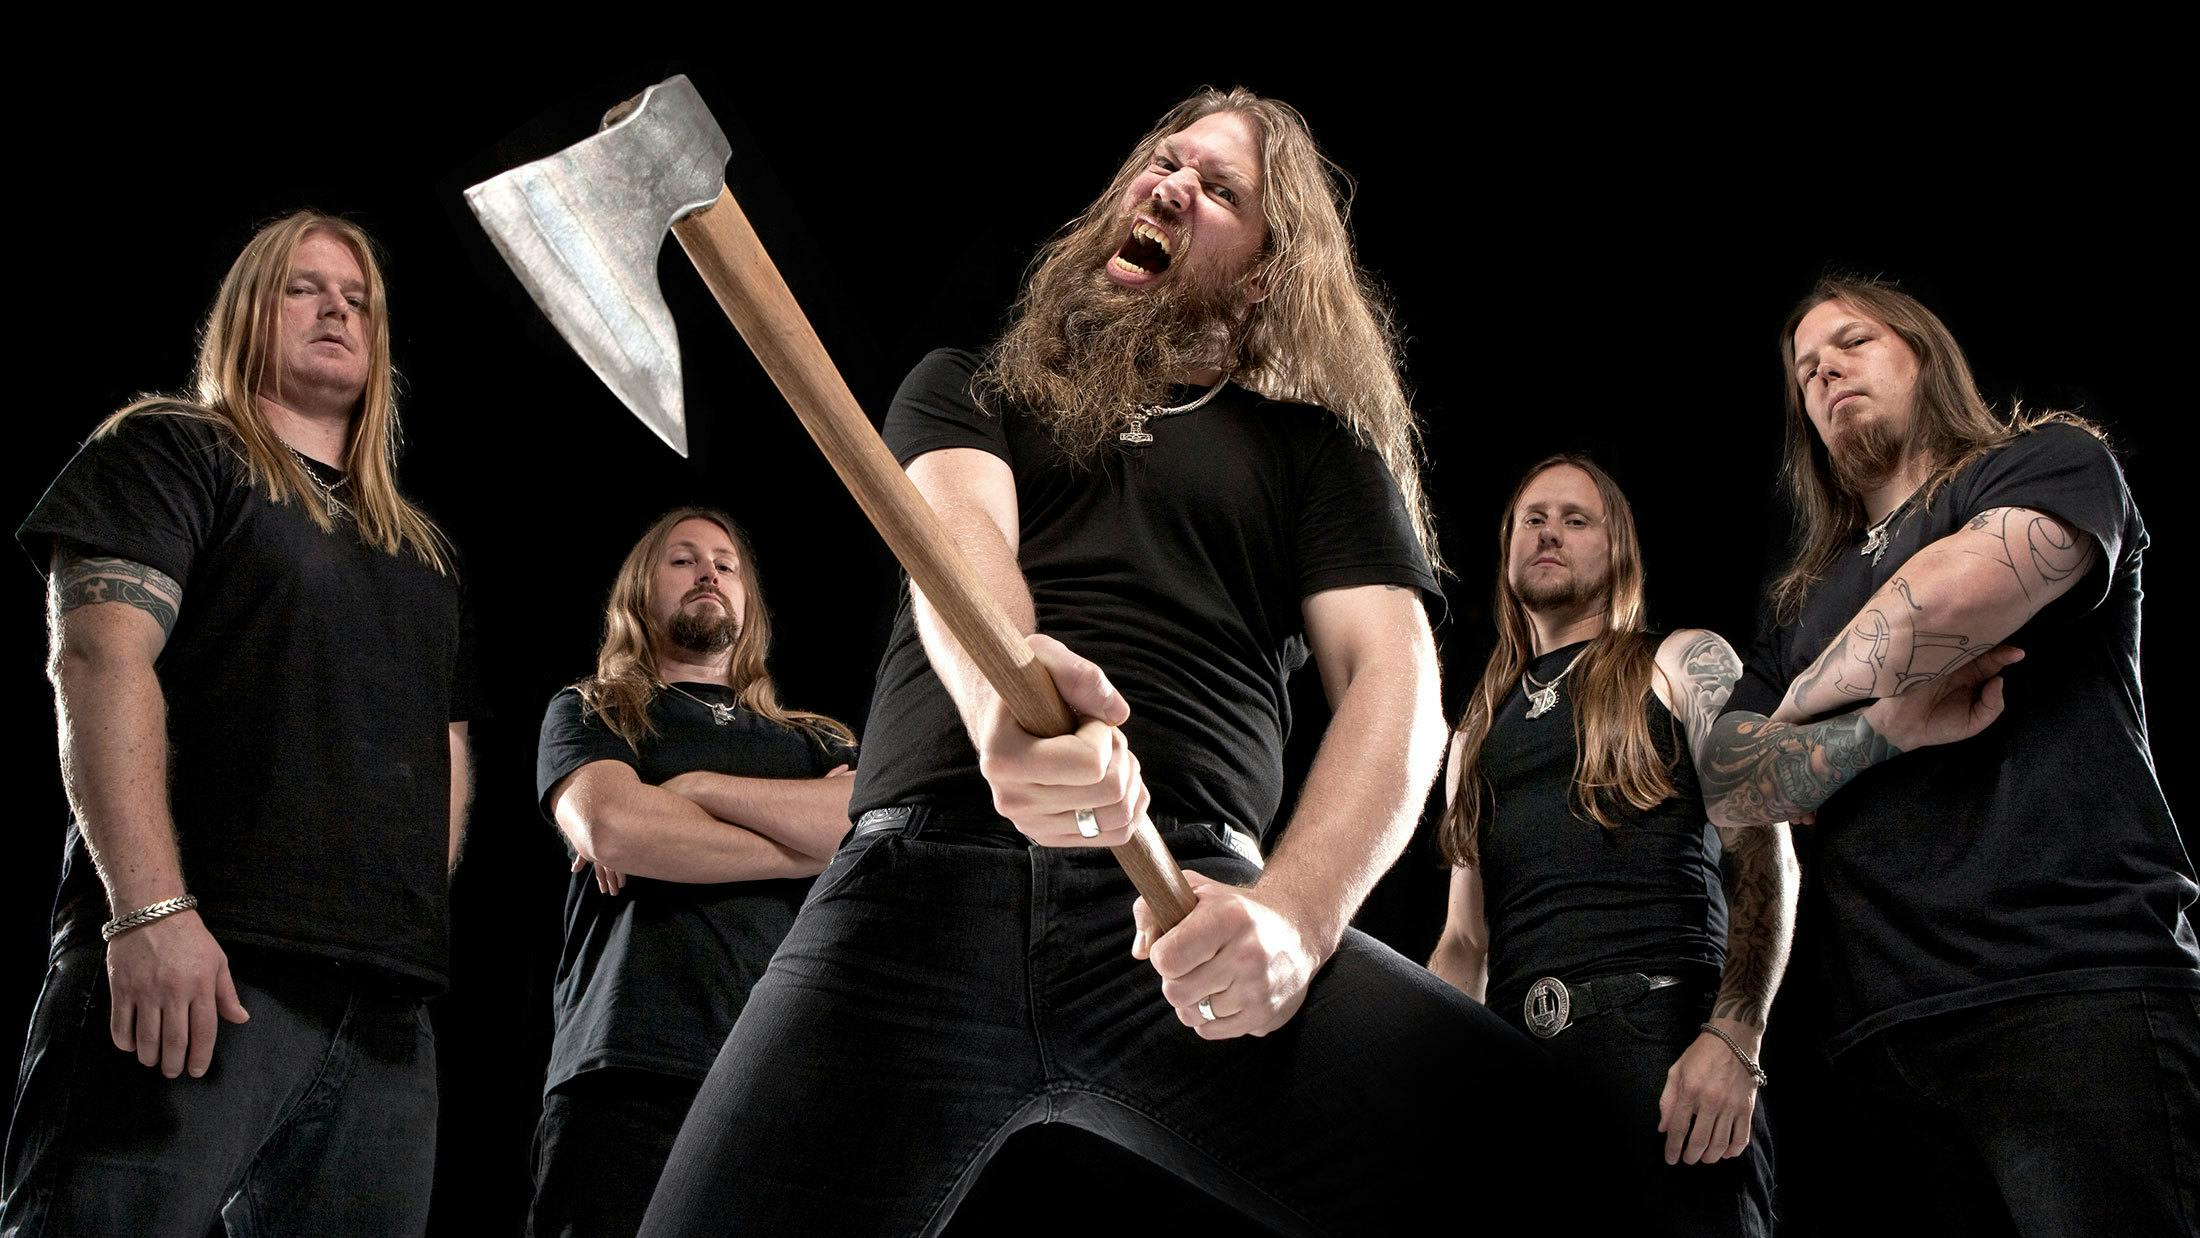 Amon Amarth Need Los Angeles-Based Extras For Their New Video